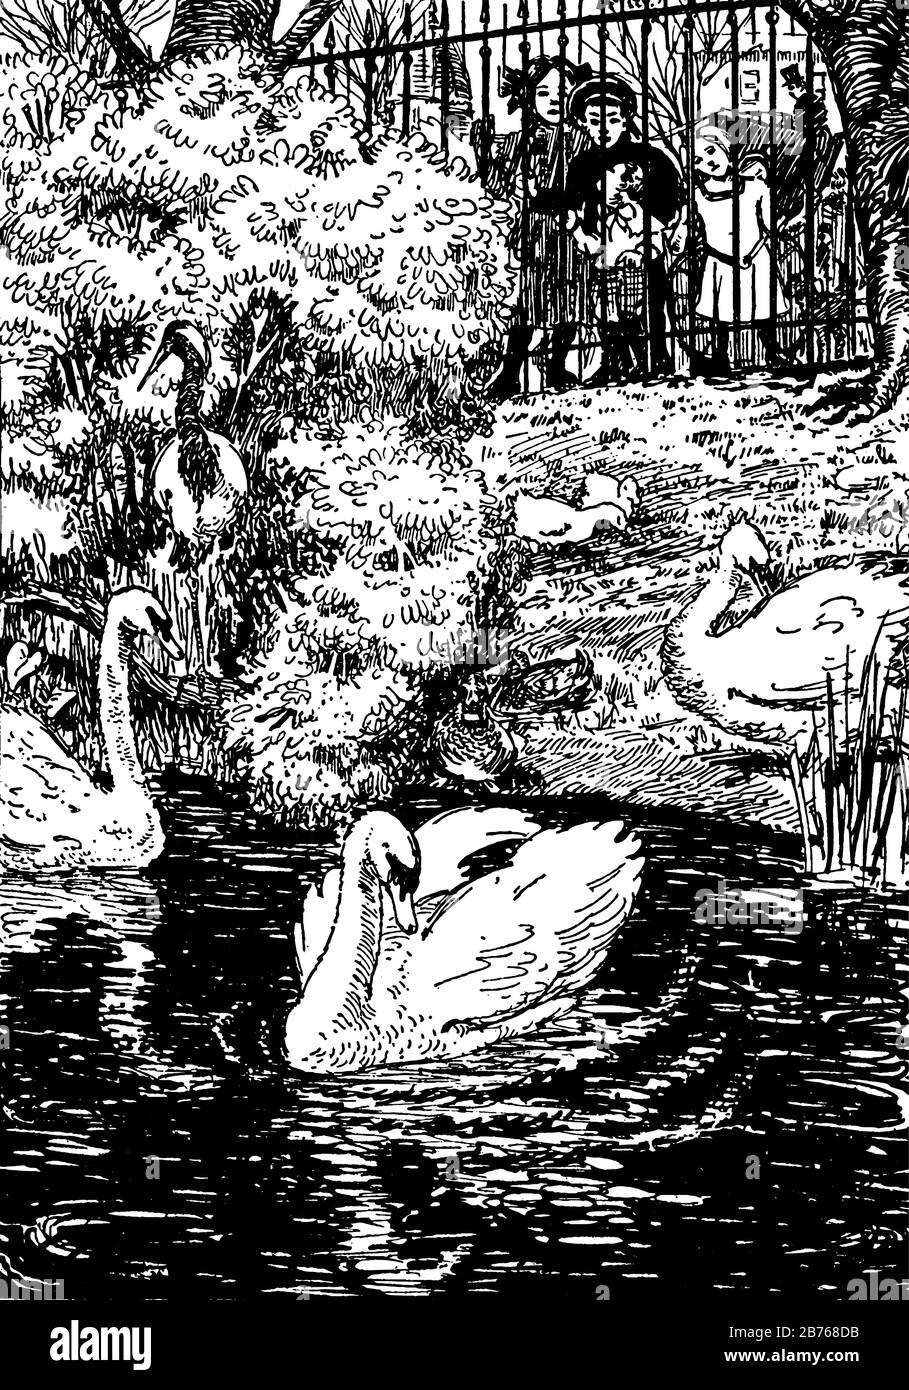 Three children looking at ducks in the water, vintage line drawing or ...